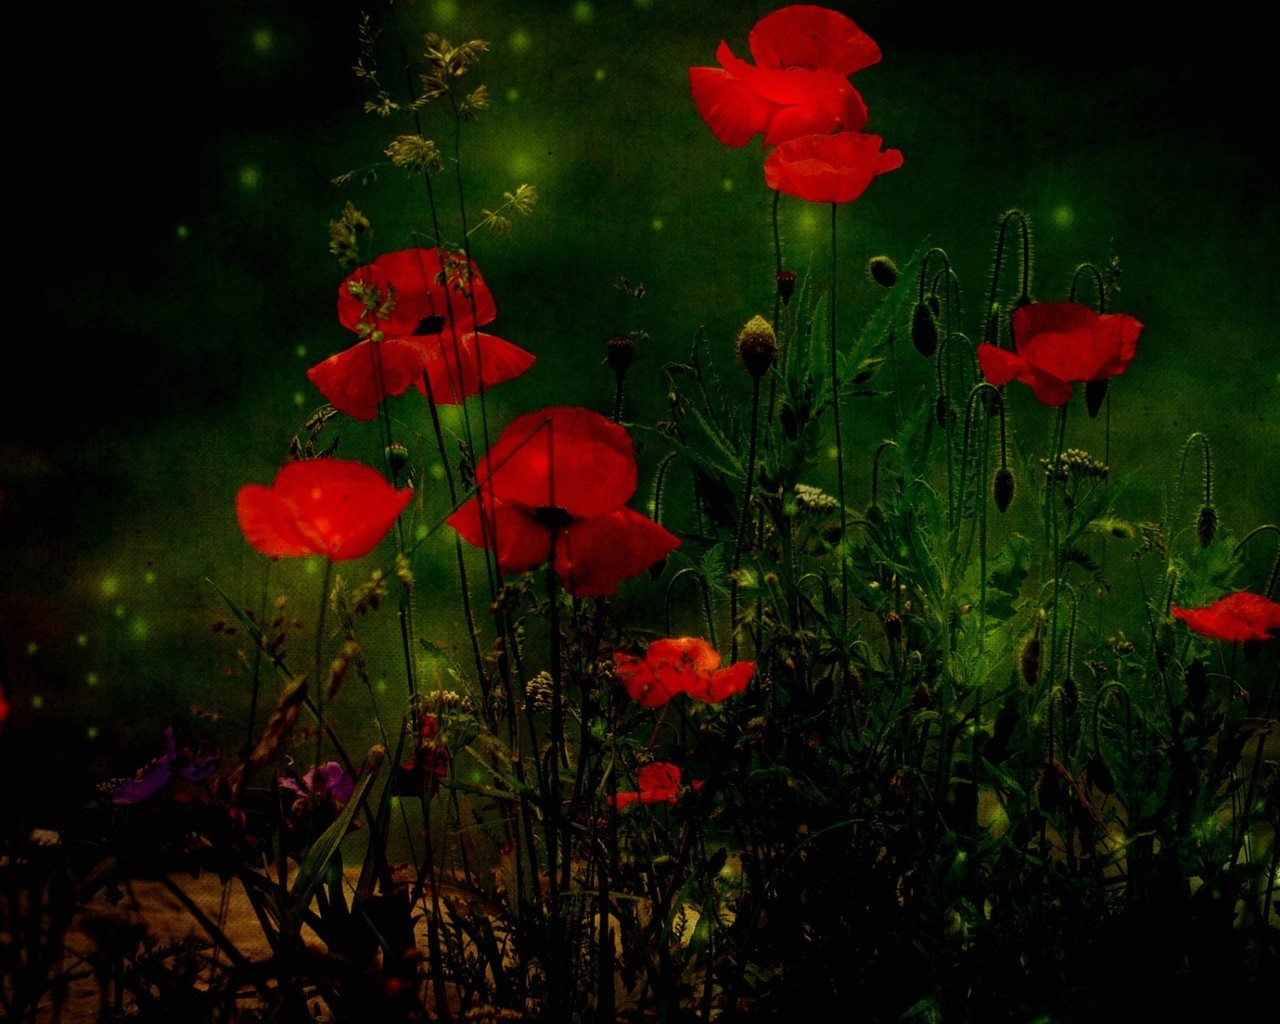 Red Poppies for 1280 x 1024 resolution